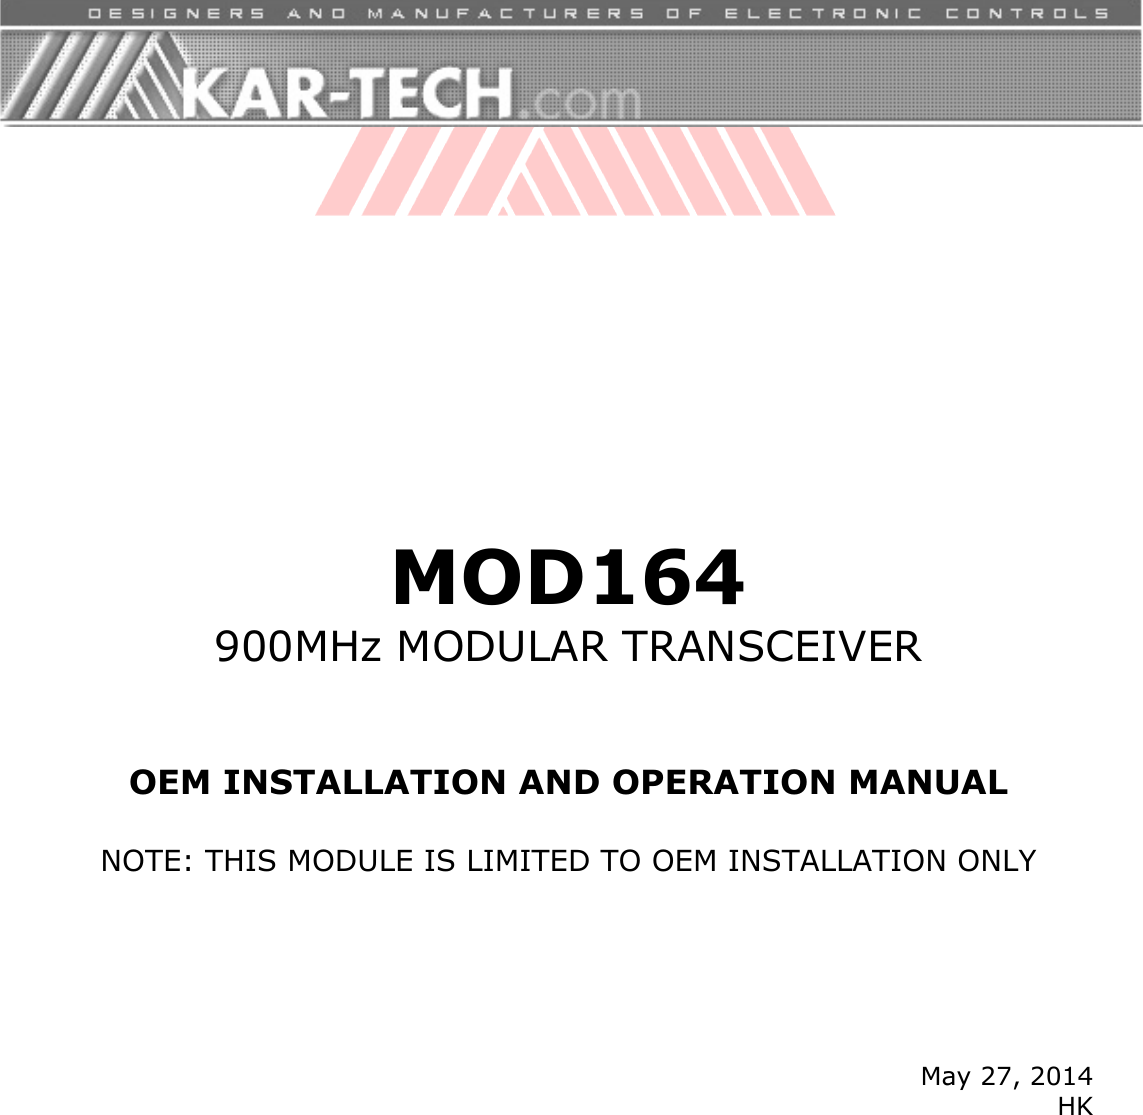           MOD164 900MHz MODULAR TRANSCEIVER    OEM INSTALLATION AND OPERATION MANUAL  NOTE: THIS MODULE IS LIMITED TO OEM INSTALLATION ONLY       May 27, 2014 HK 